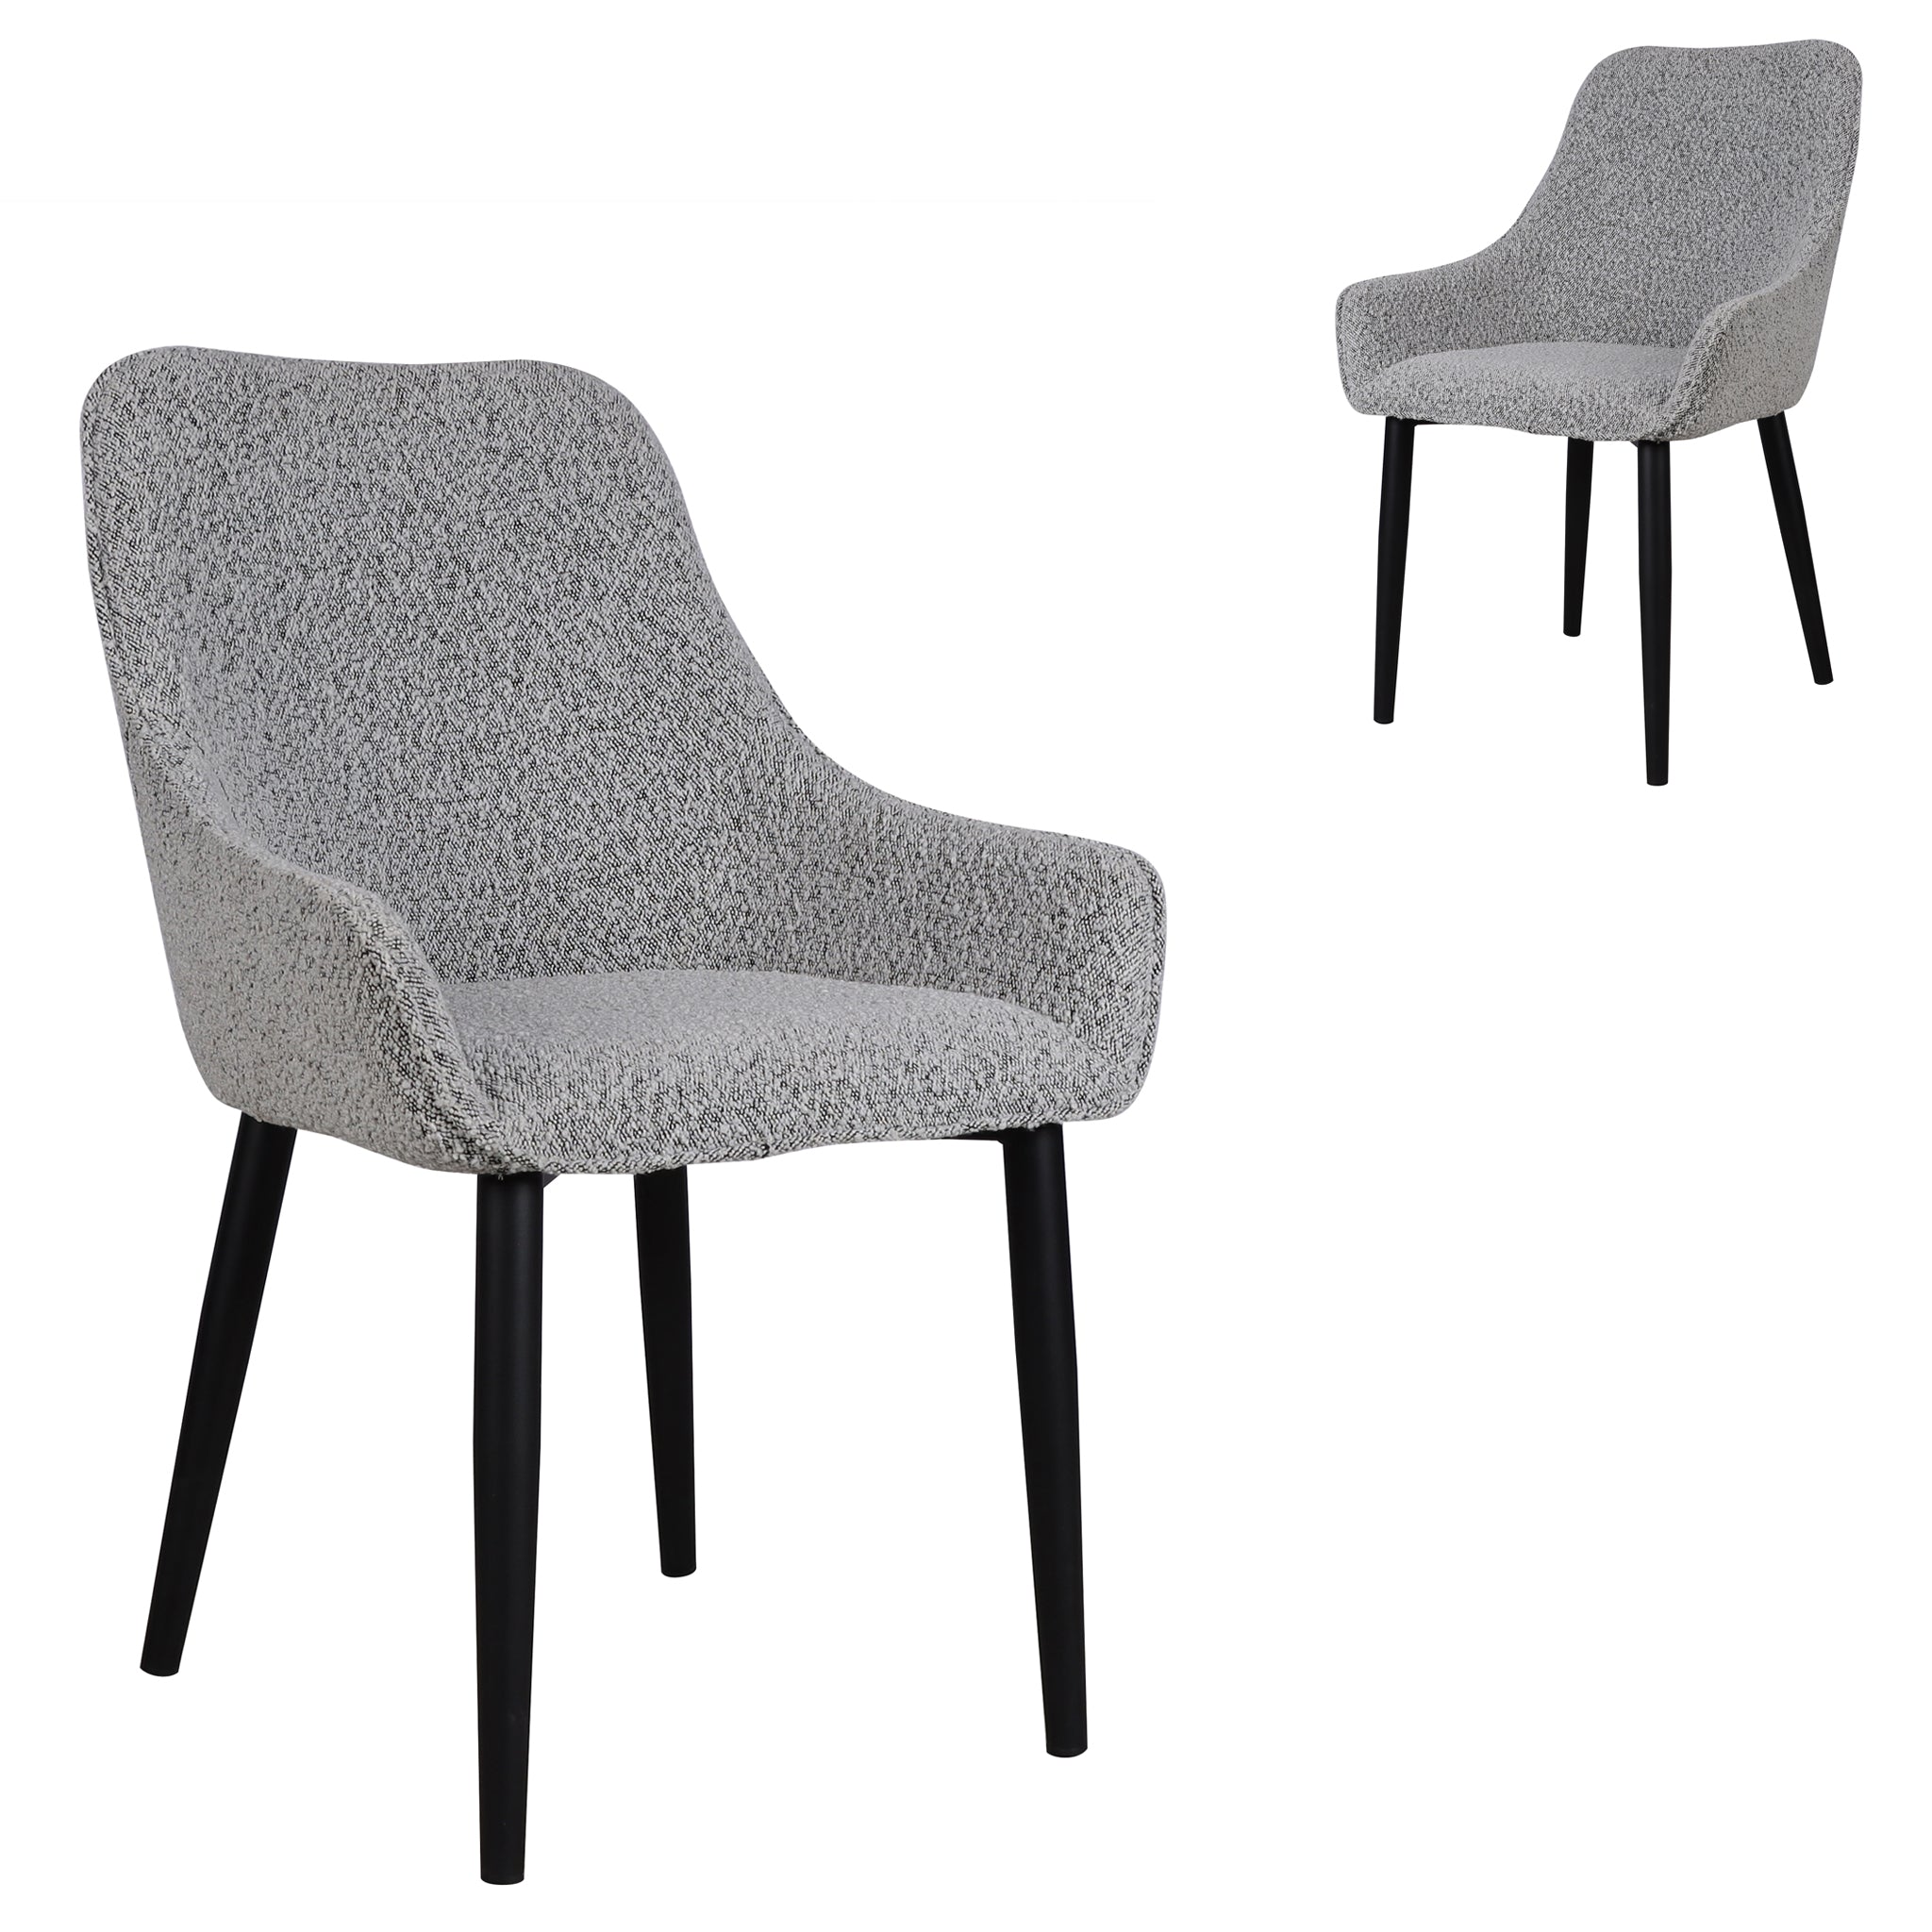 Acosta Dining Chair - Pepper Boucle in Black Legs (Set of 2)